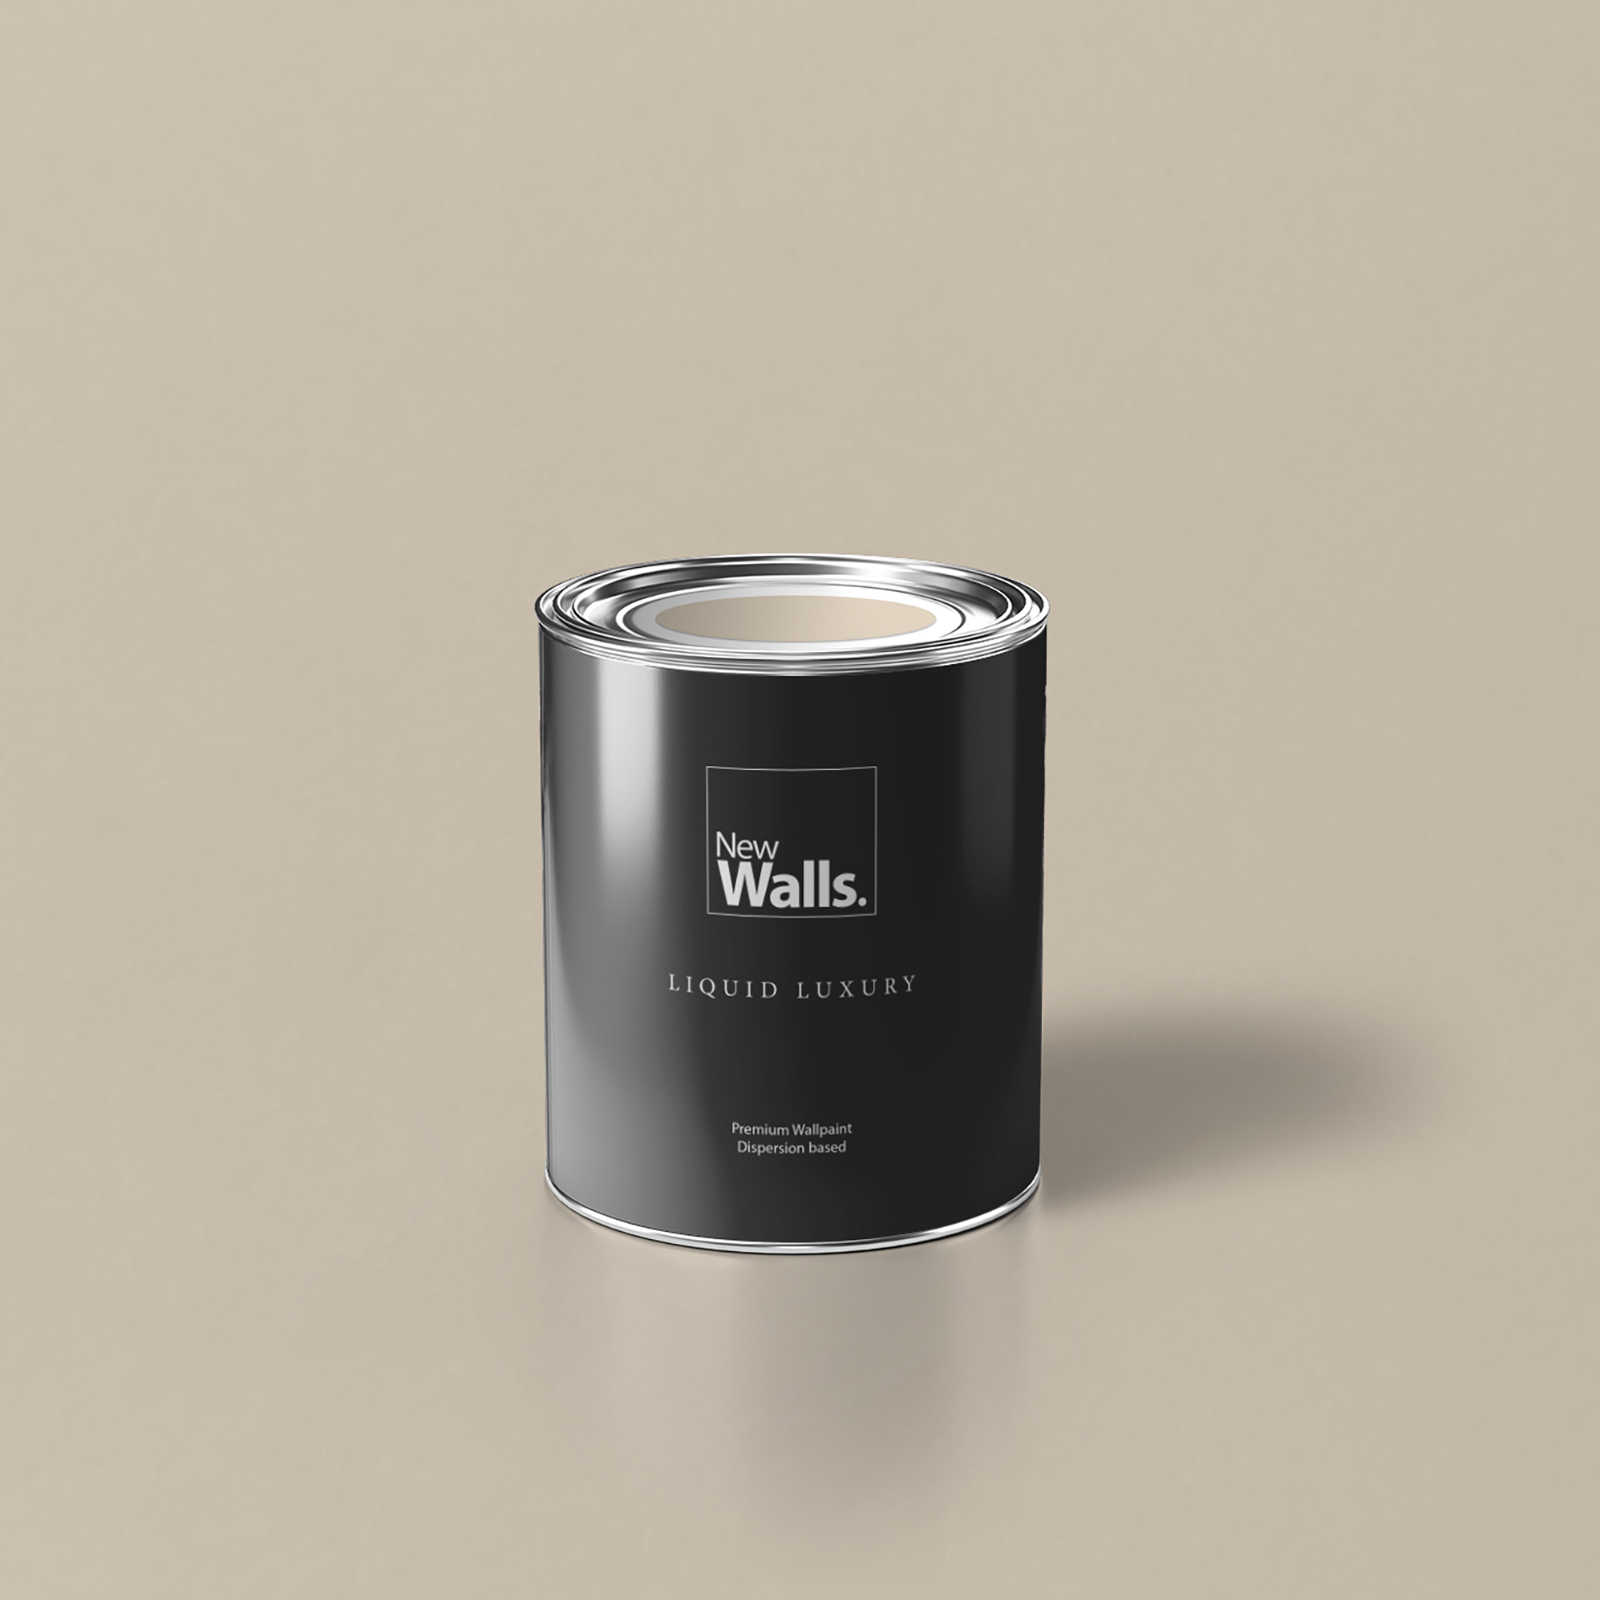         Premium Wall Paint Warm Sand »Essential Earth« NW708 – 1 litre
    